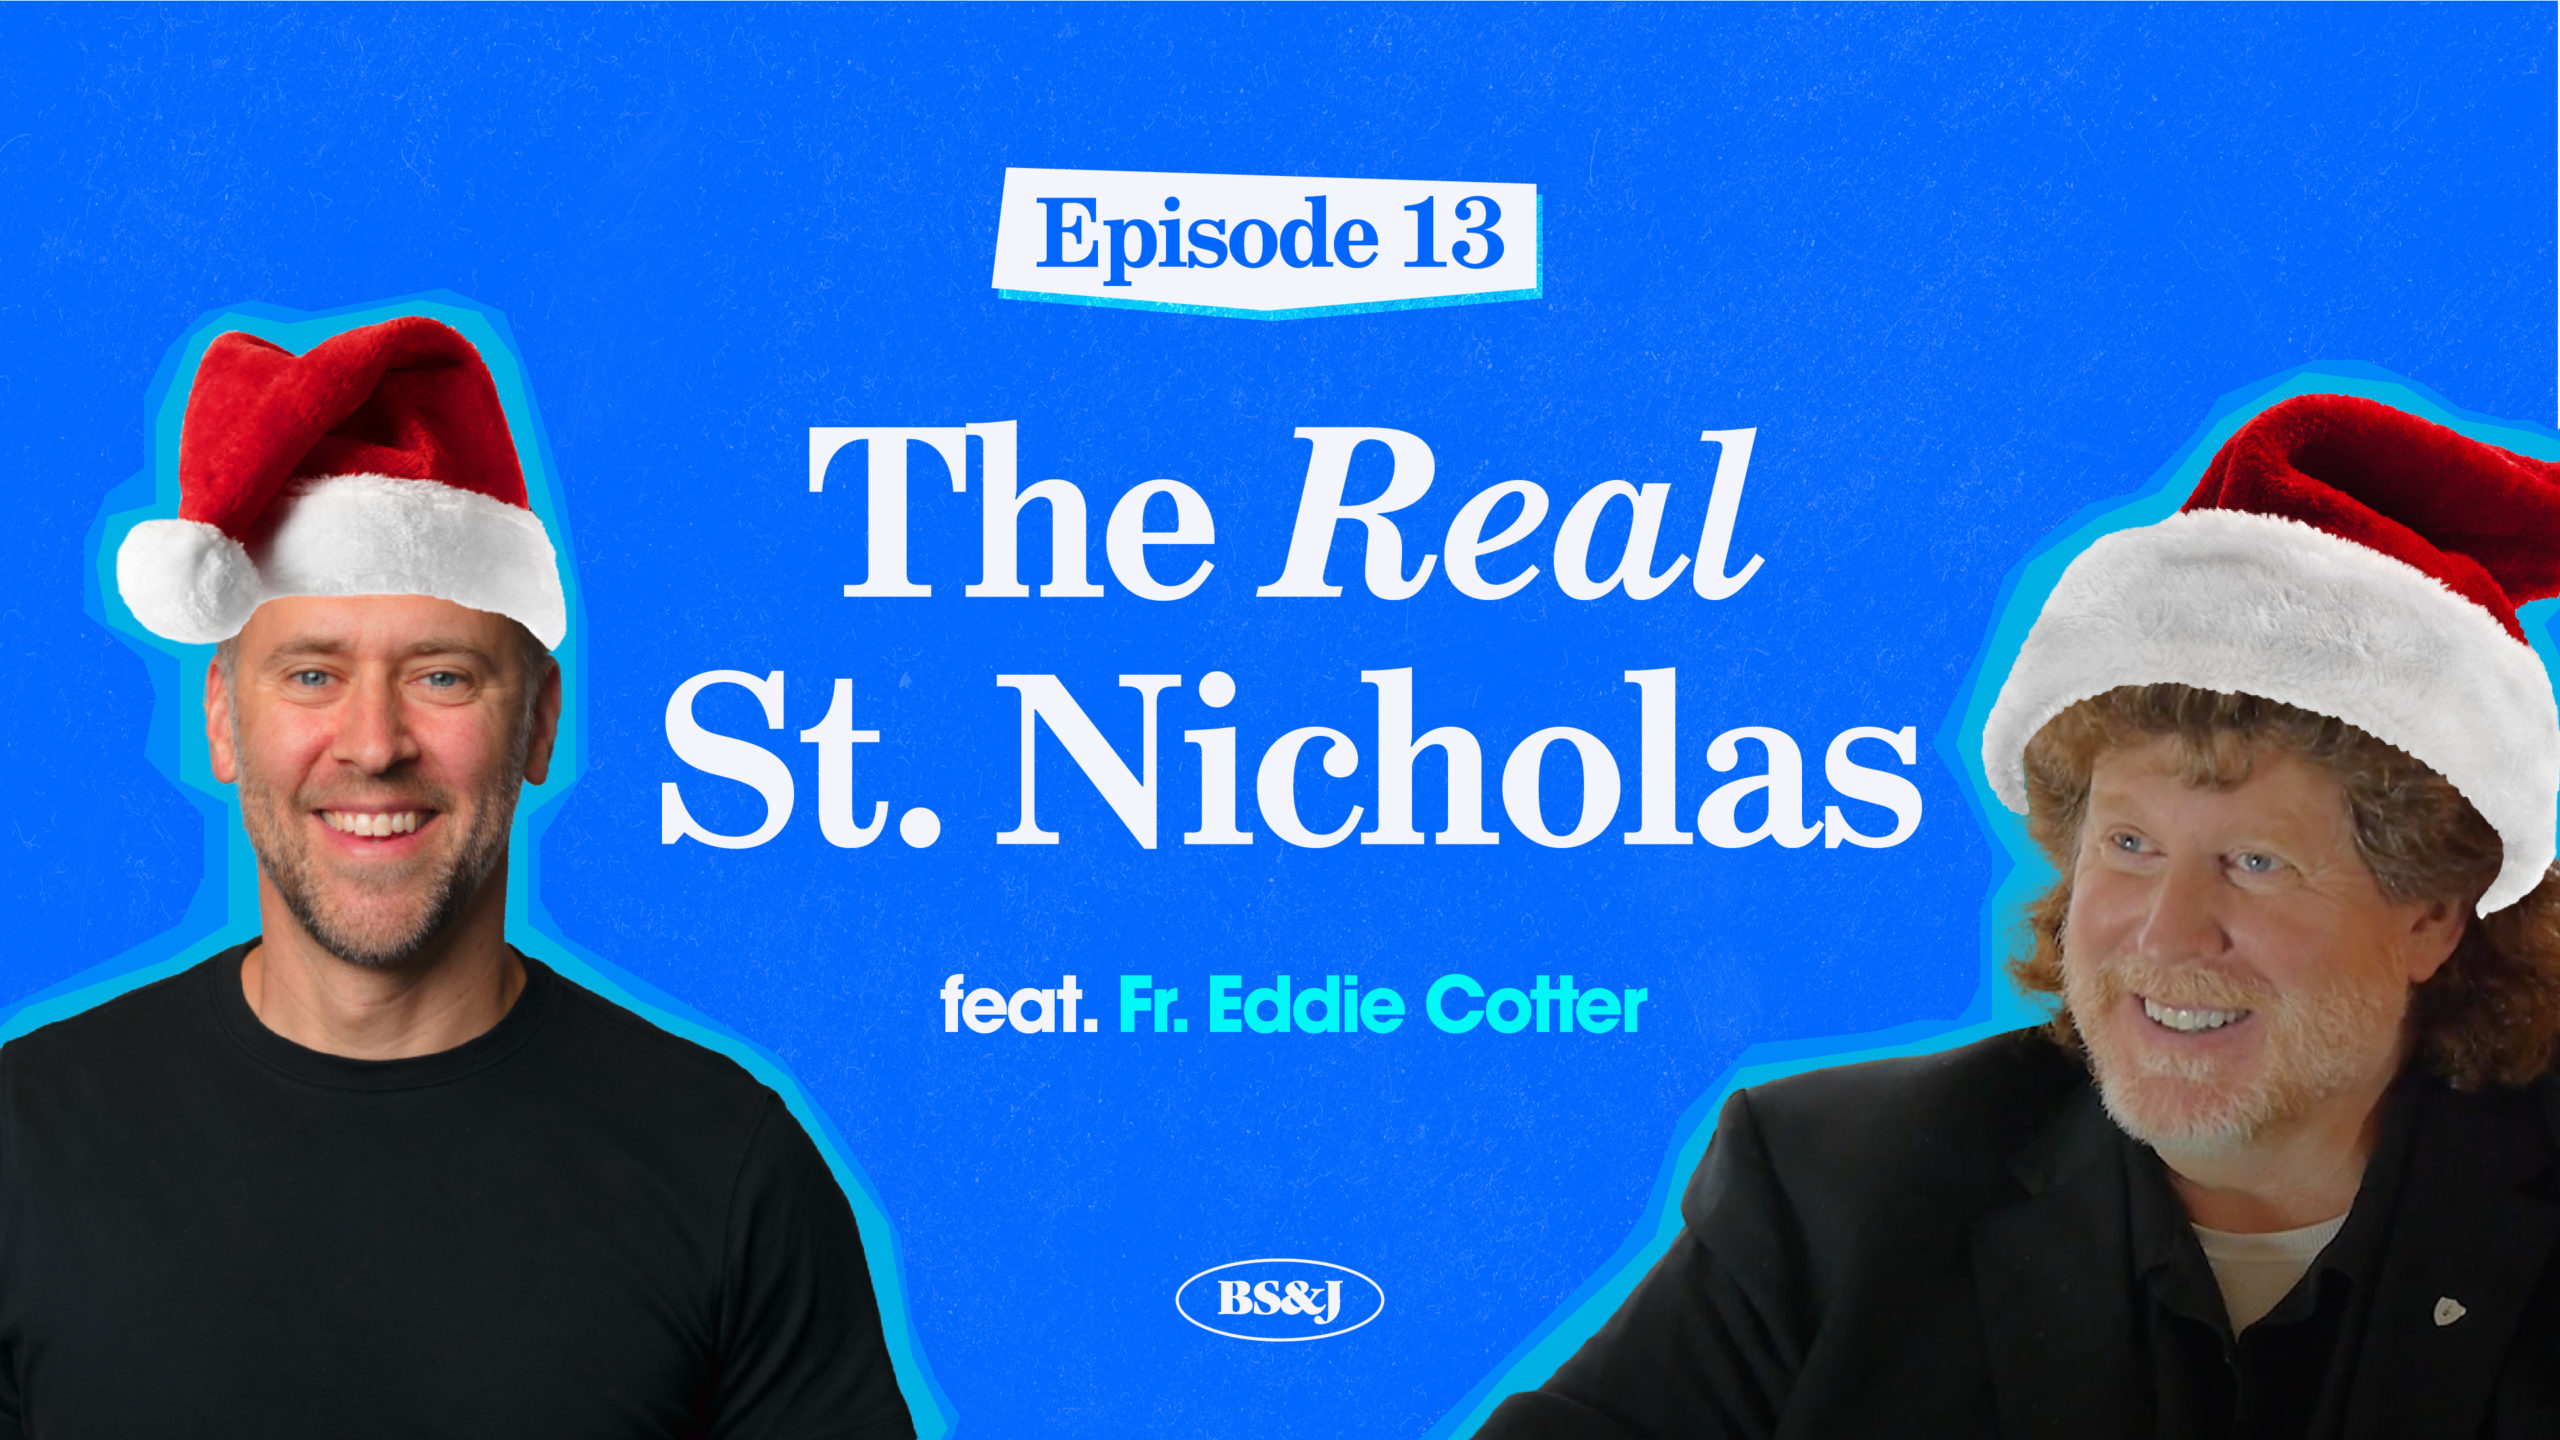 Episode 13 – The Real St. Nicholas with Eddie Cotter